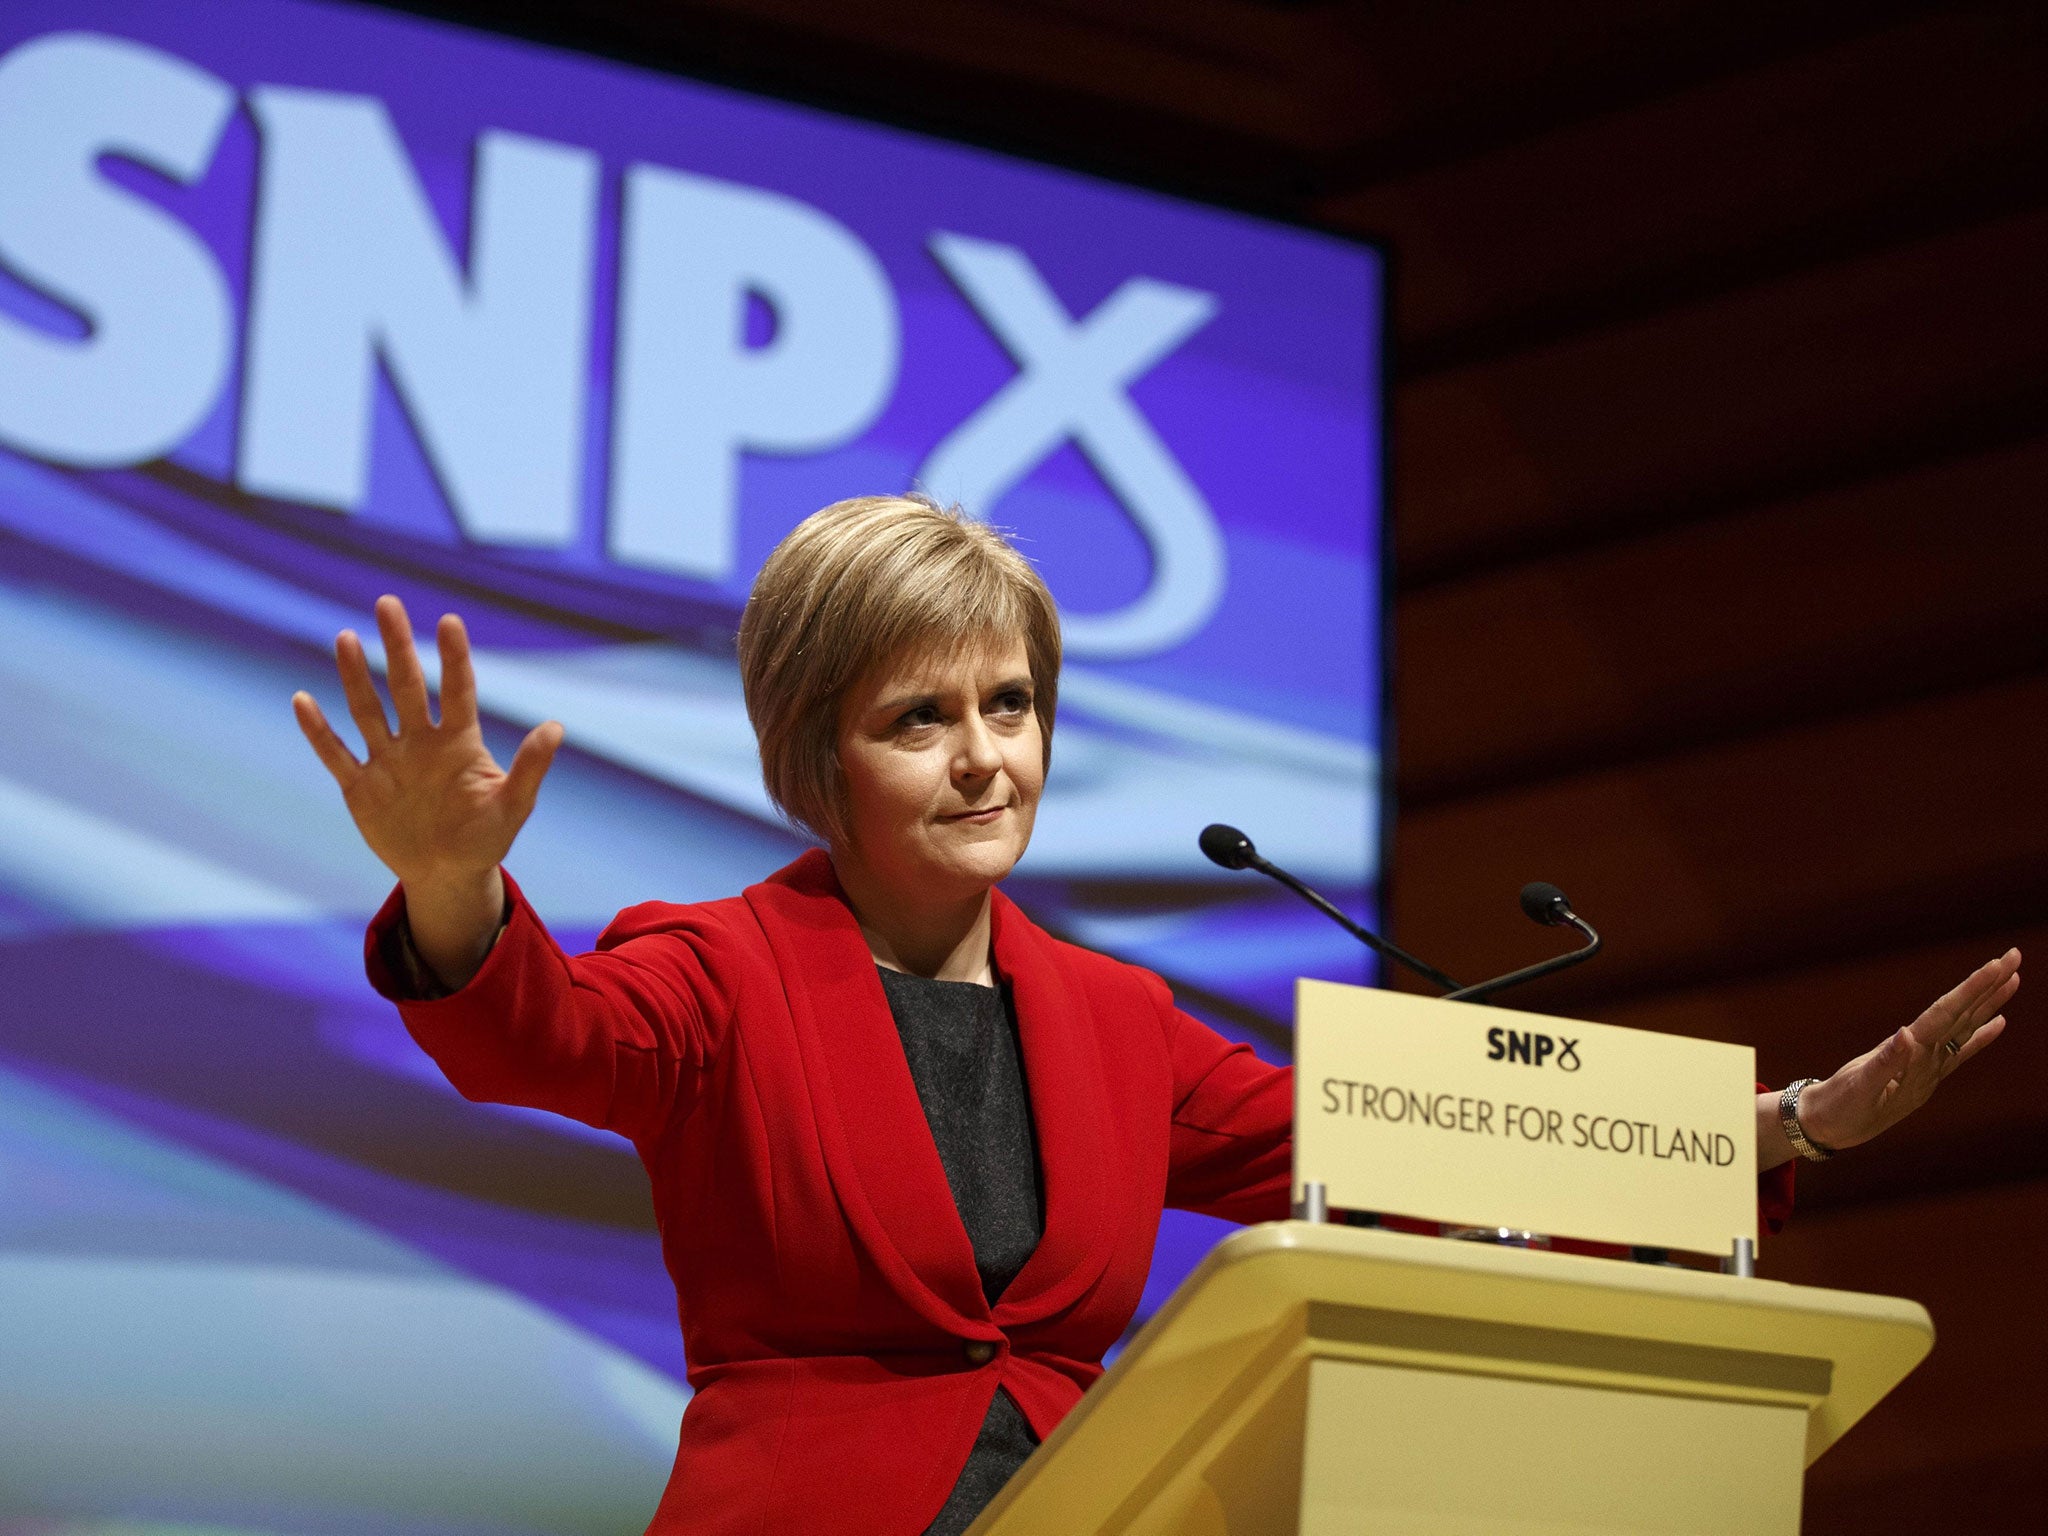 Nicola Sturgeon promised SNP members that independence 'will be won'